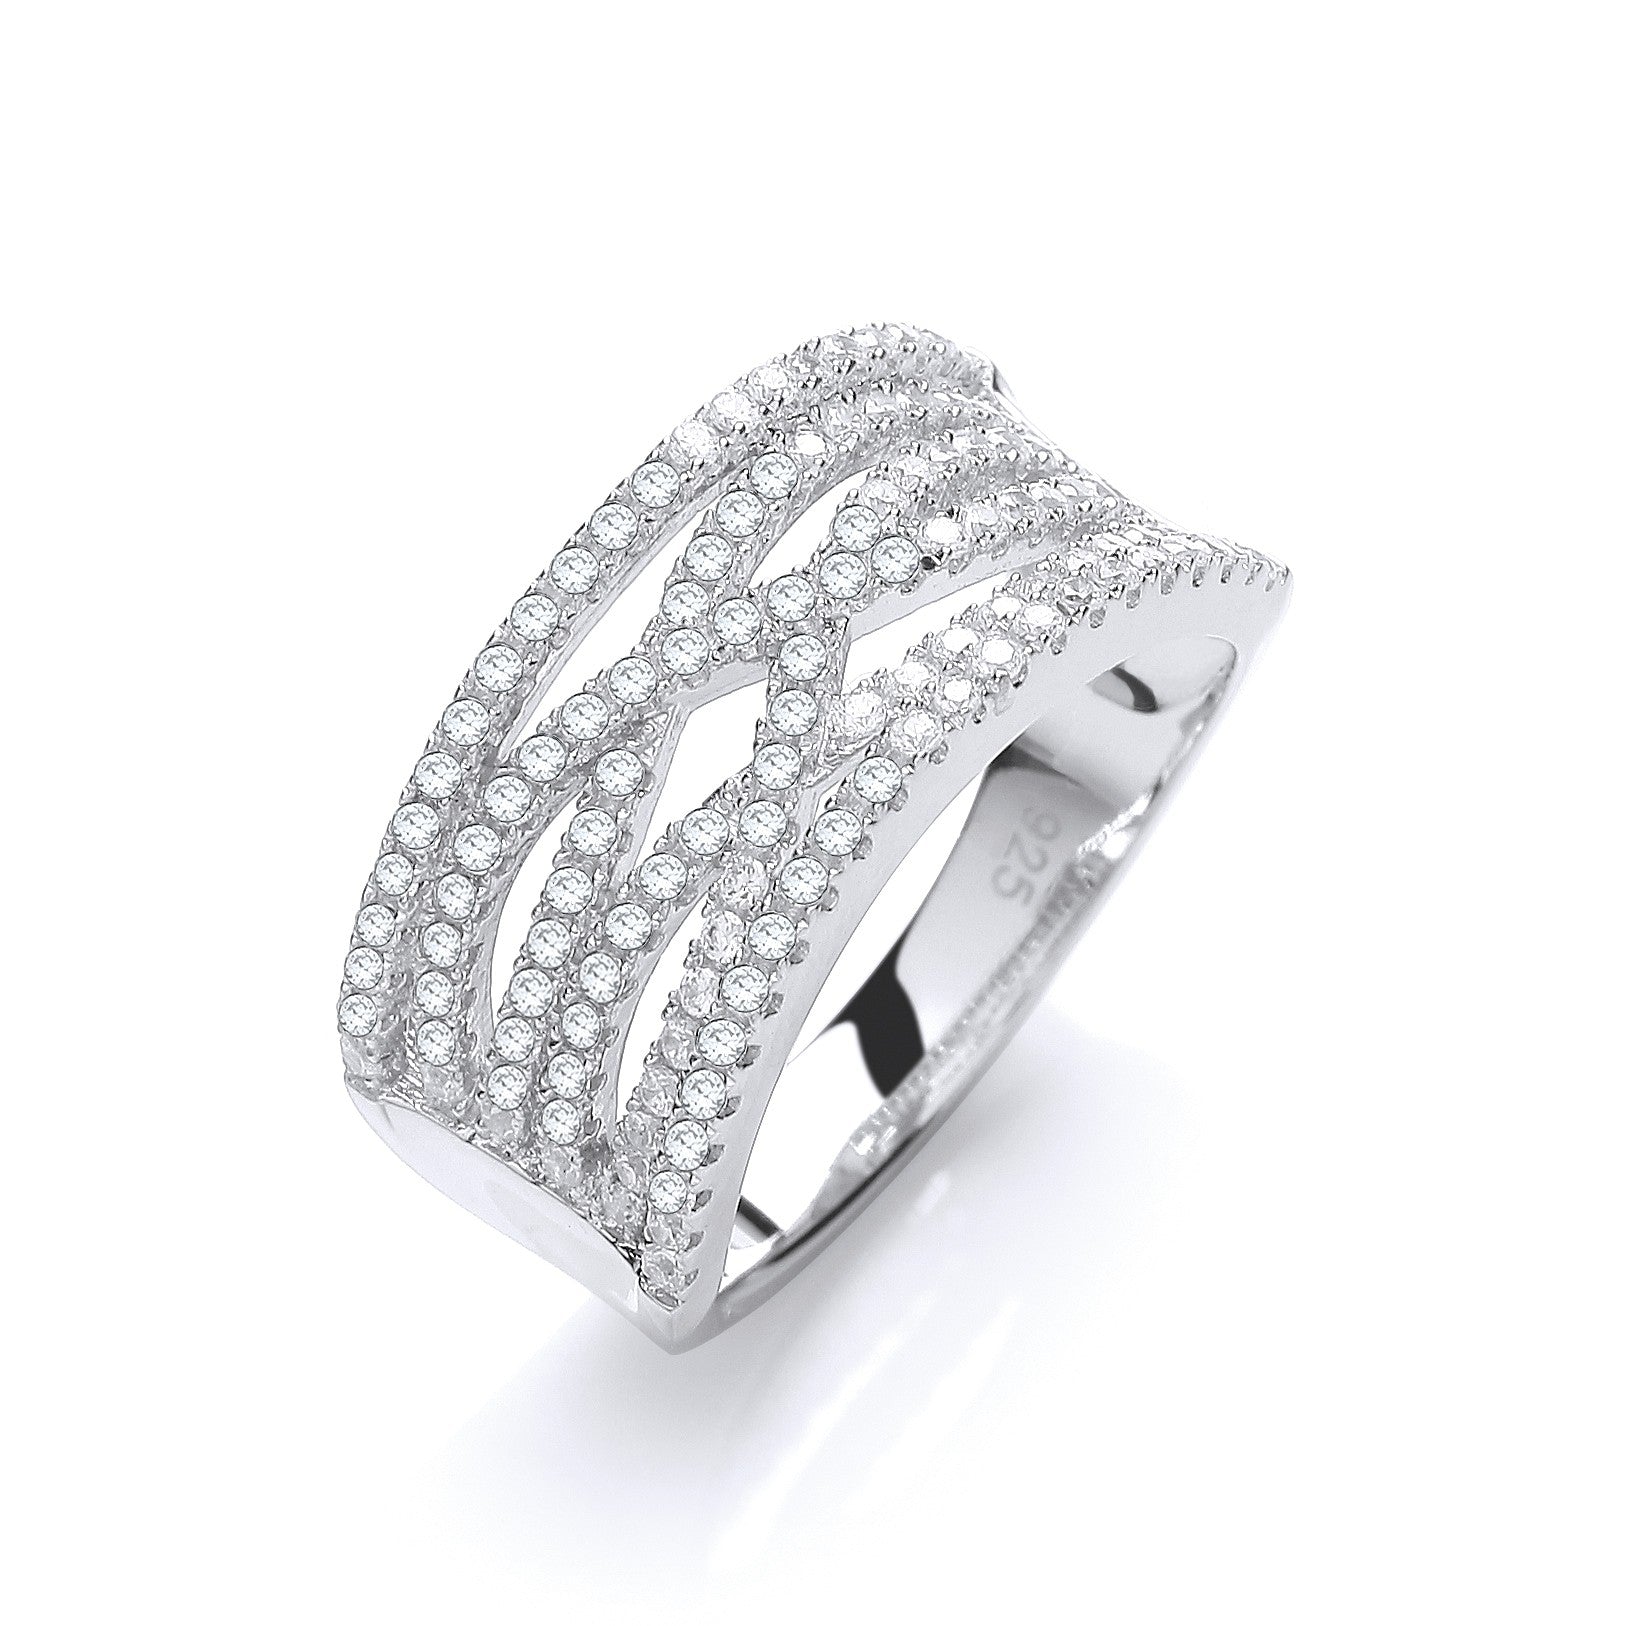 Micro Pave' White Cubic Zirconia Ring